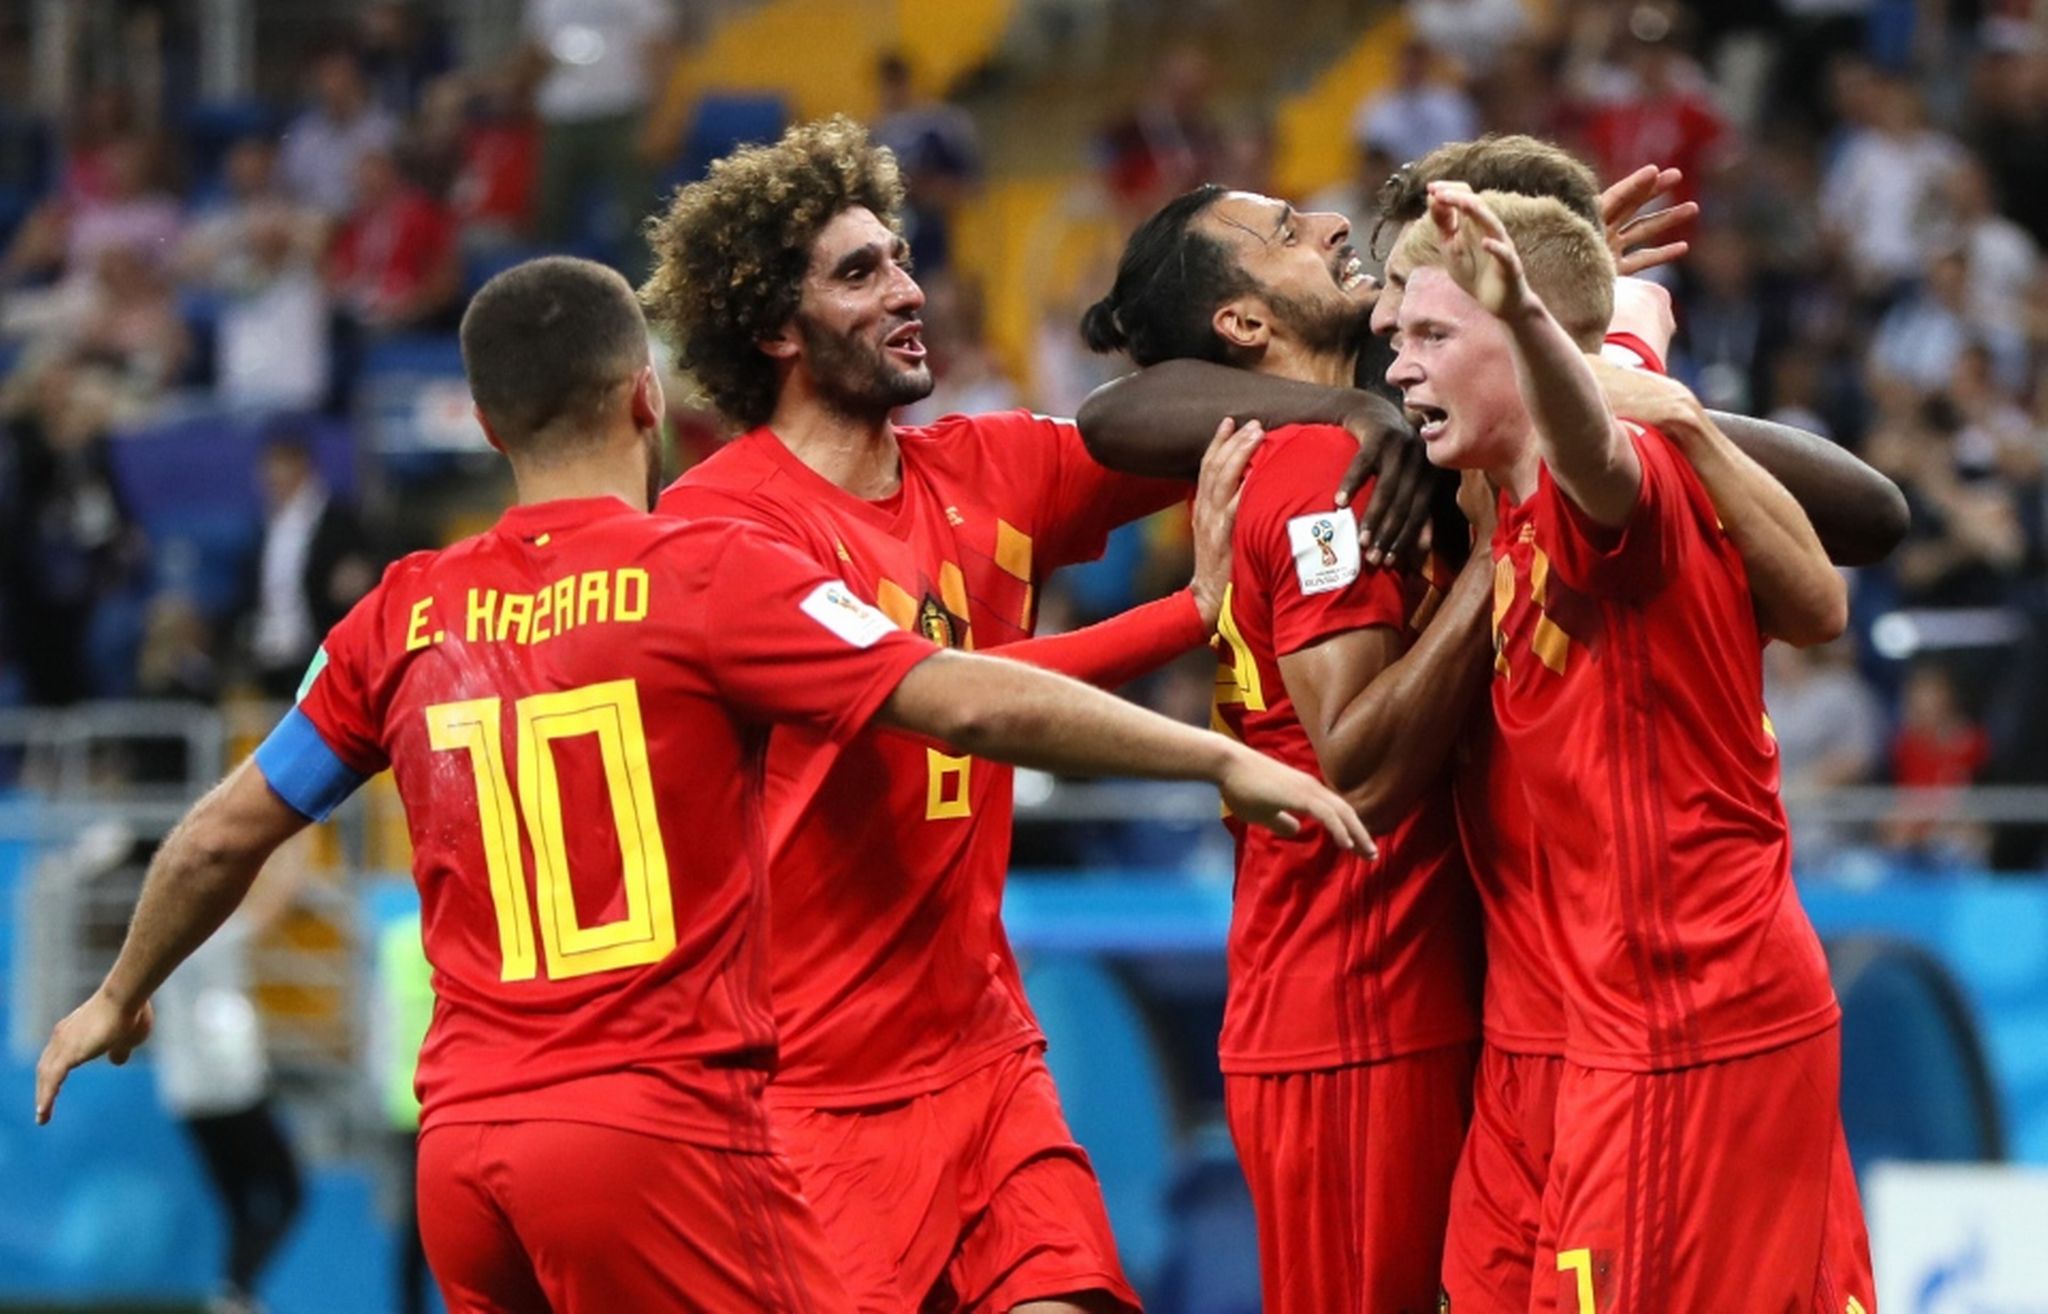 FIFA World Cup 2018: Last minute goal by Chadli gets Belgium through